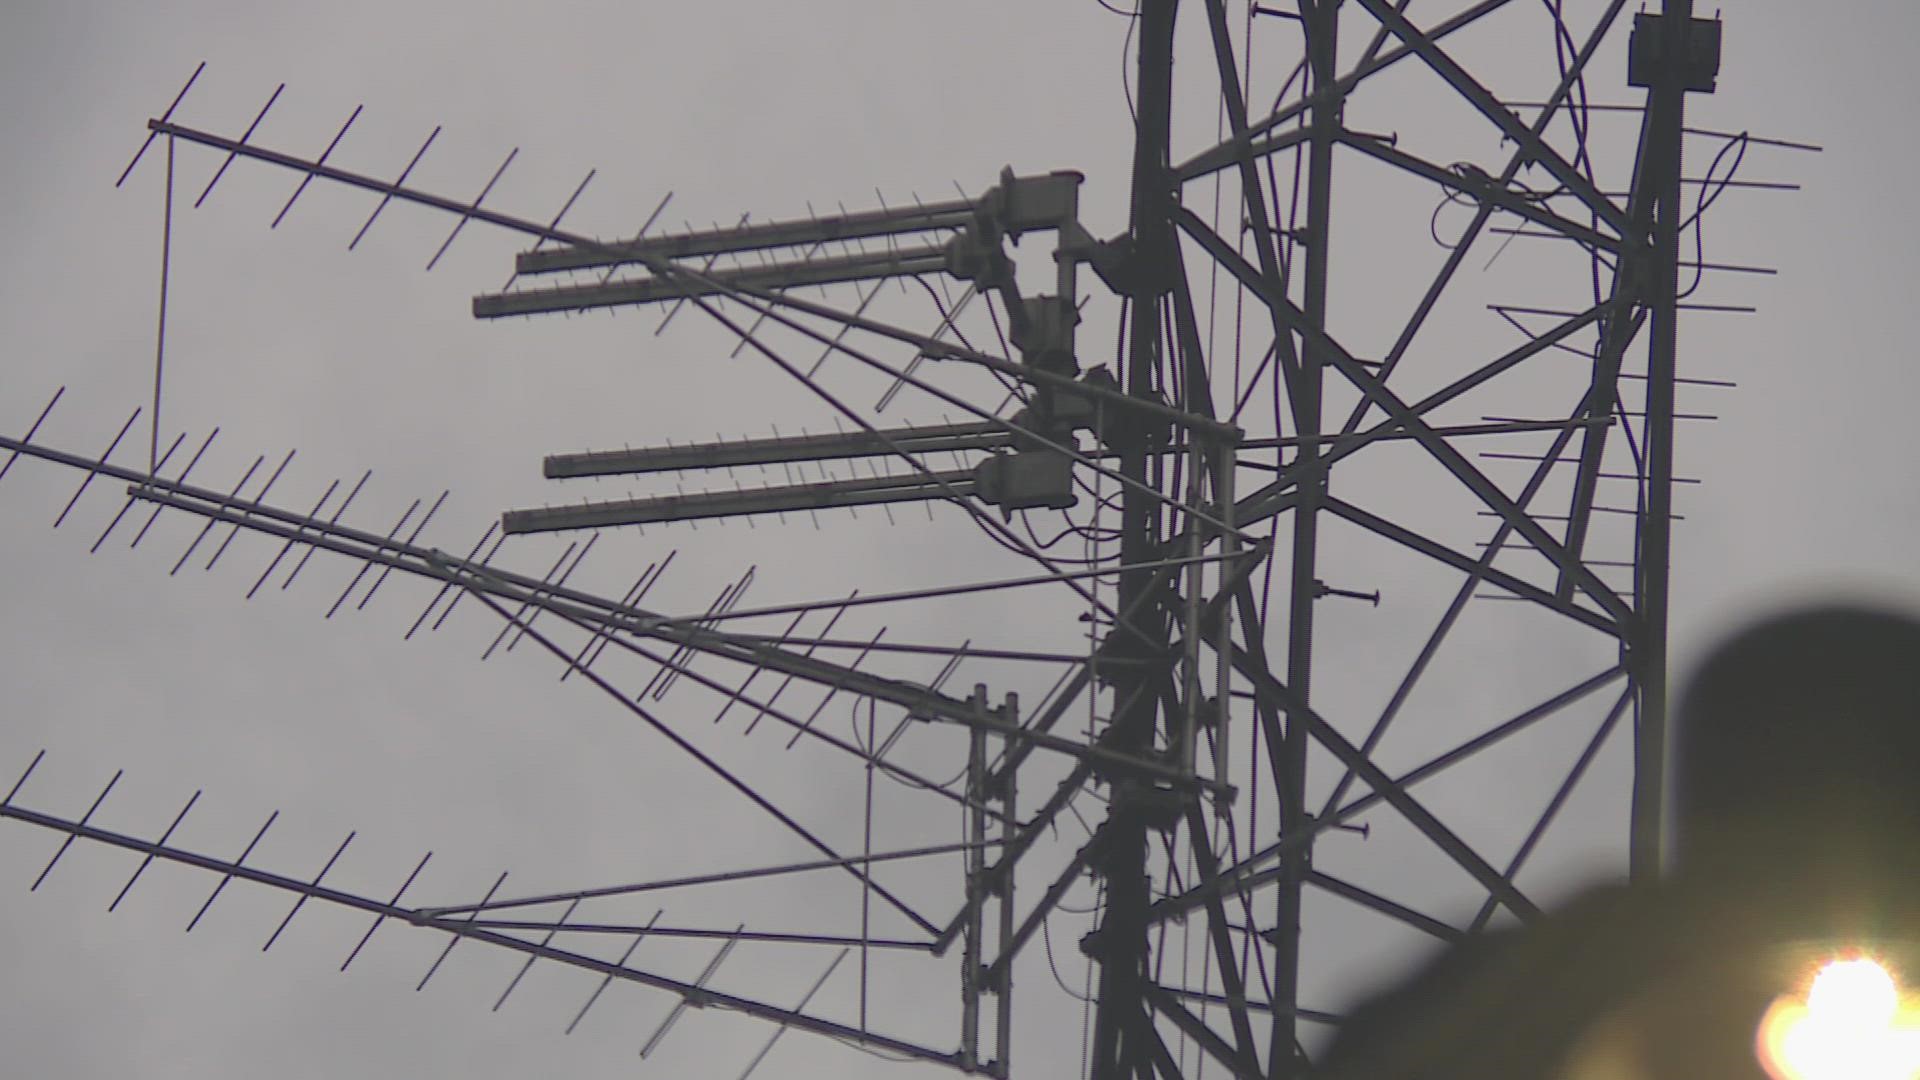 An issue has left many Bardstown Connect customers without internet for two days. Some saw service restored Friday night, but many said they still can't connect.